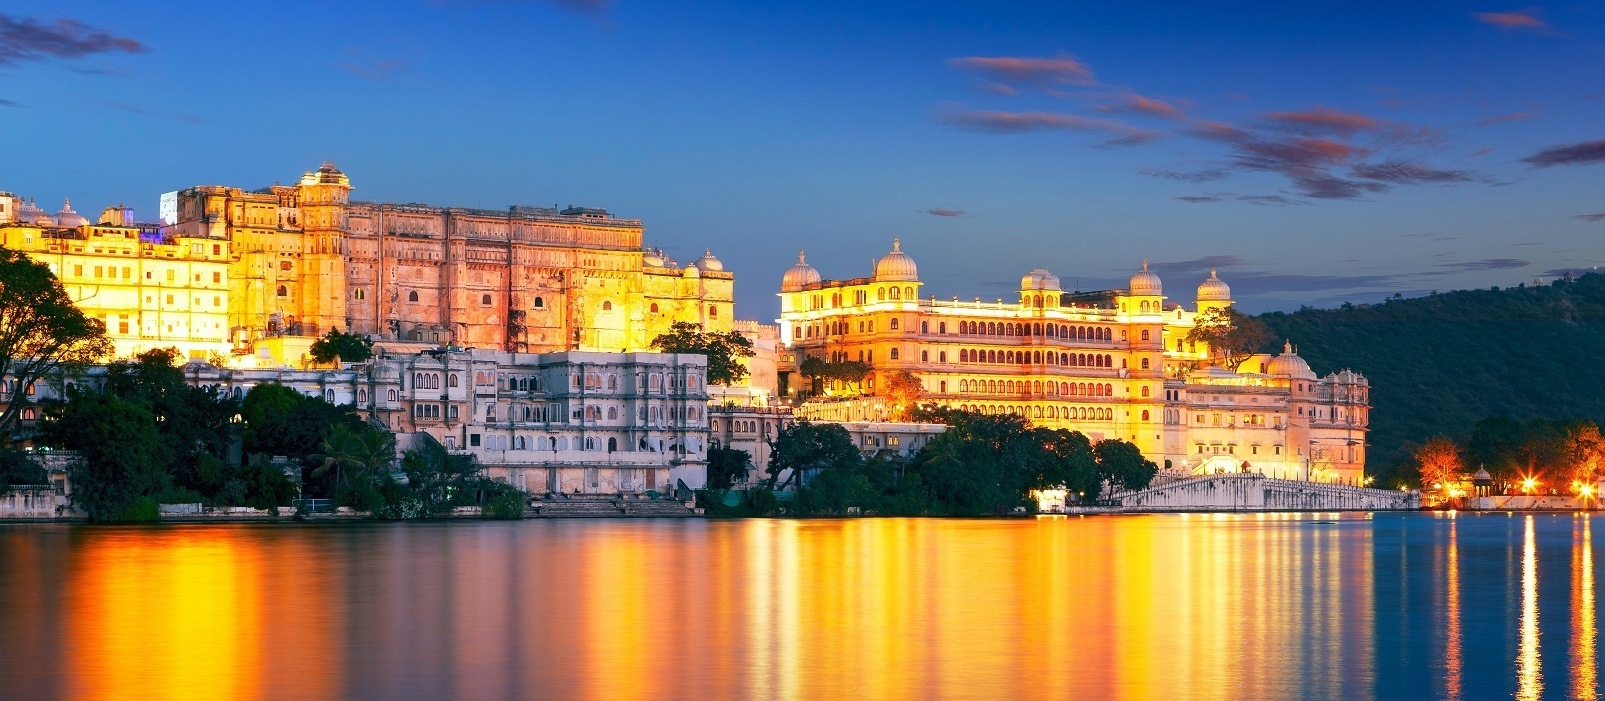 Romantic Udaipur: Top 7 Hotspots In The City Of Love